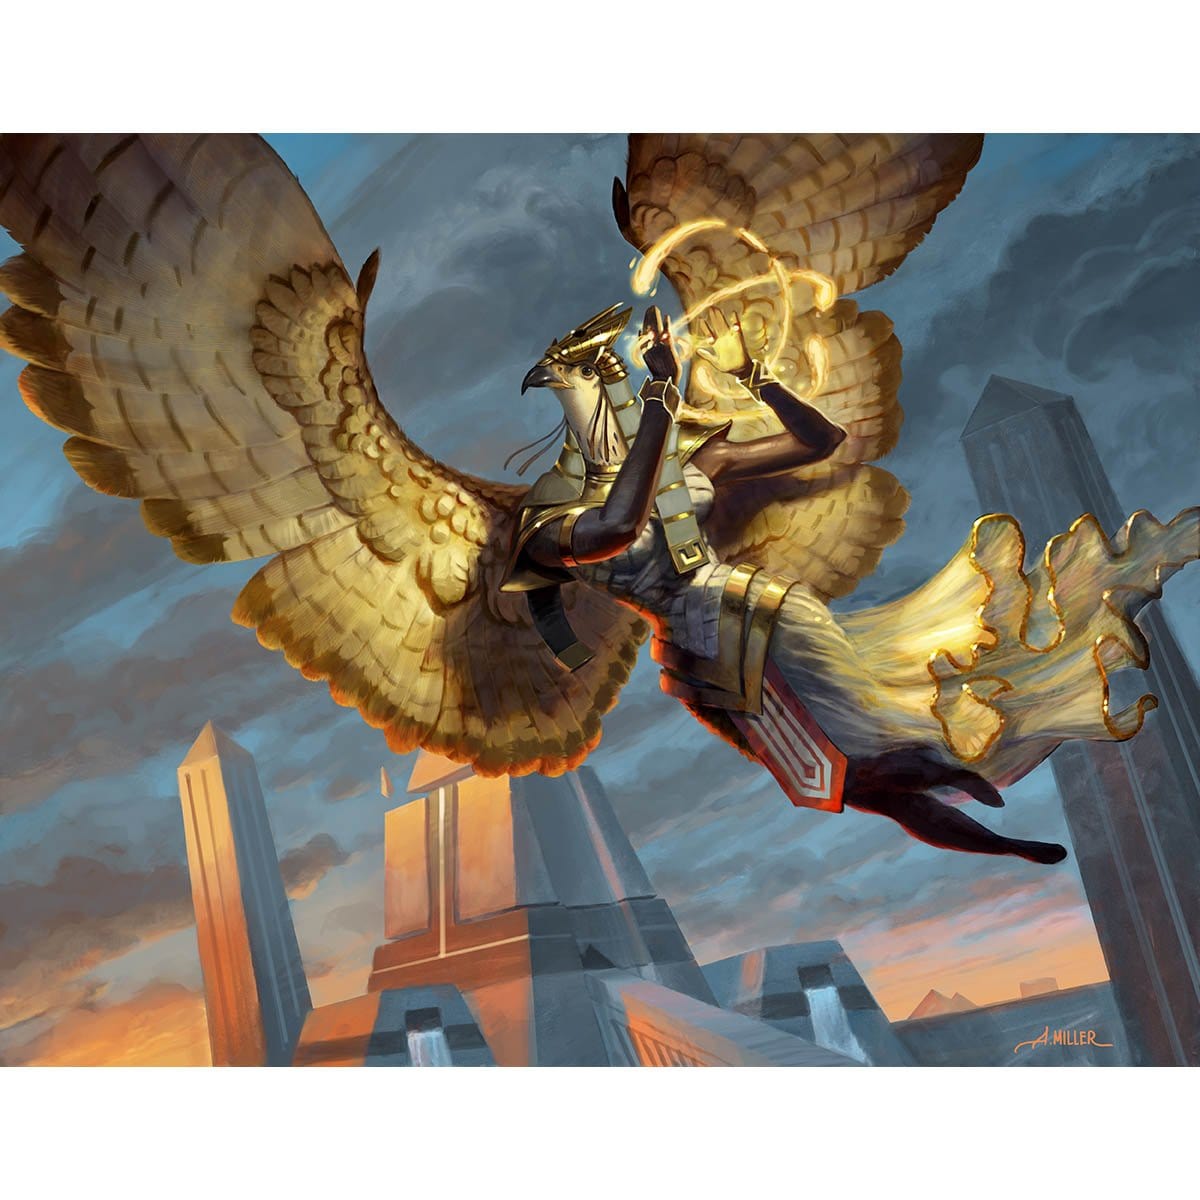 Companion of the Trials Print - Print - Original Magic Art - Accessories for Magic the Gathering and other card games